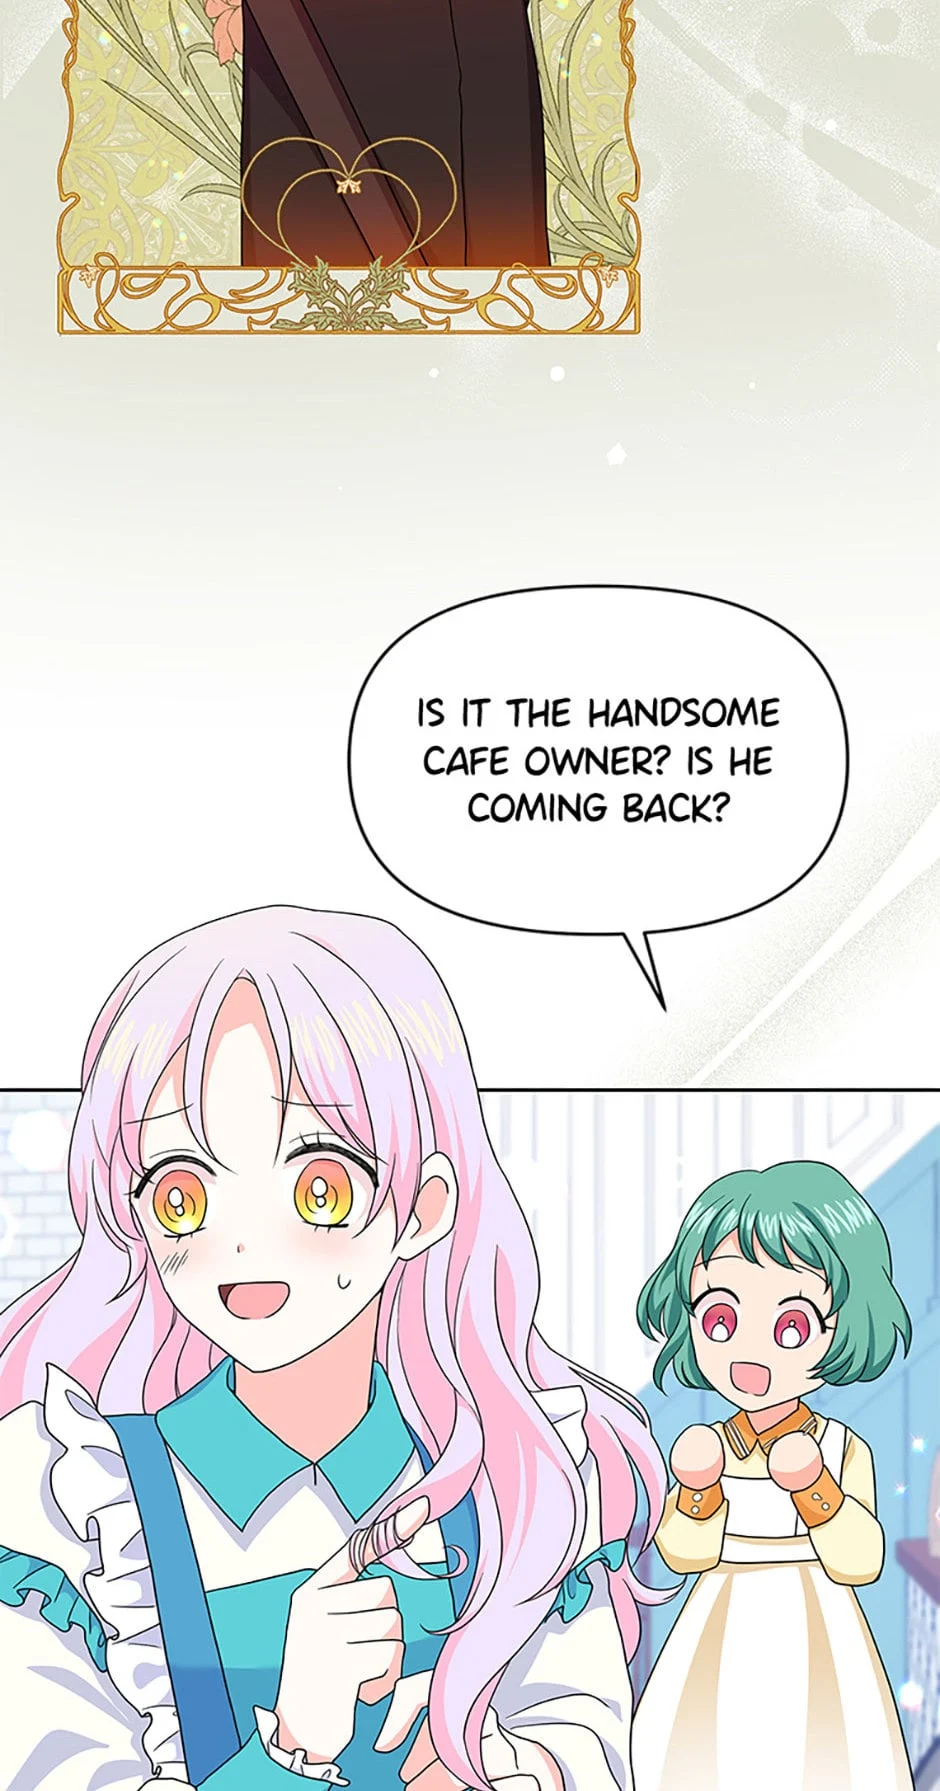 She came back and opened a dessert shop chapter 35